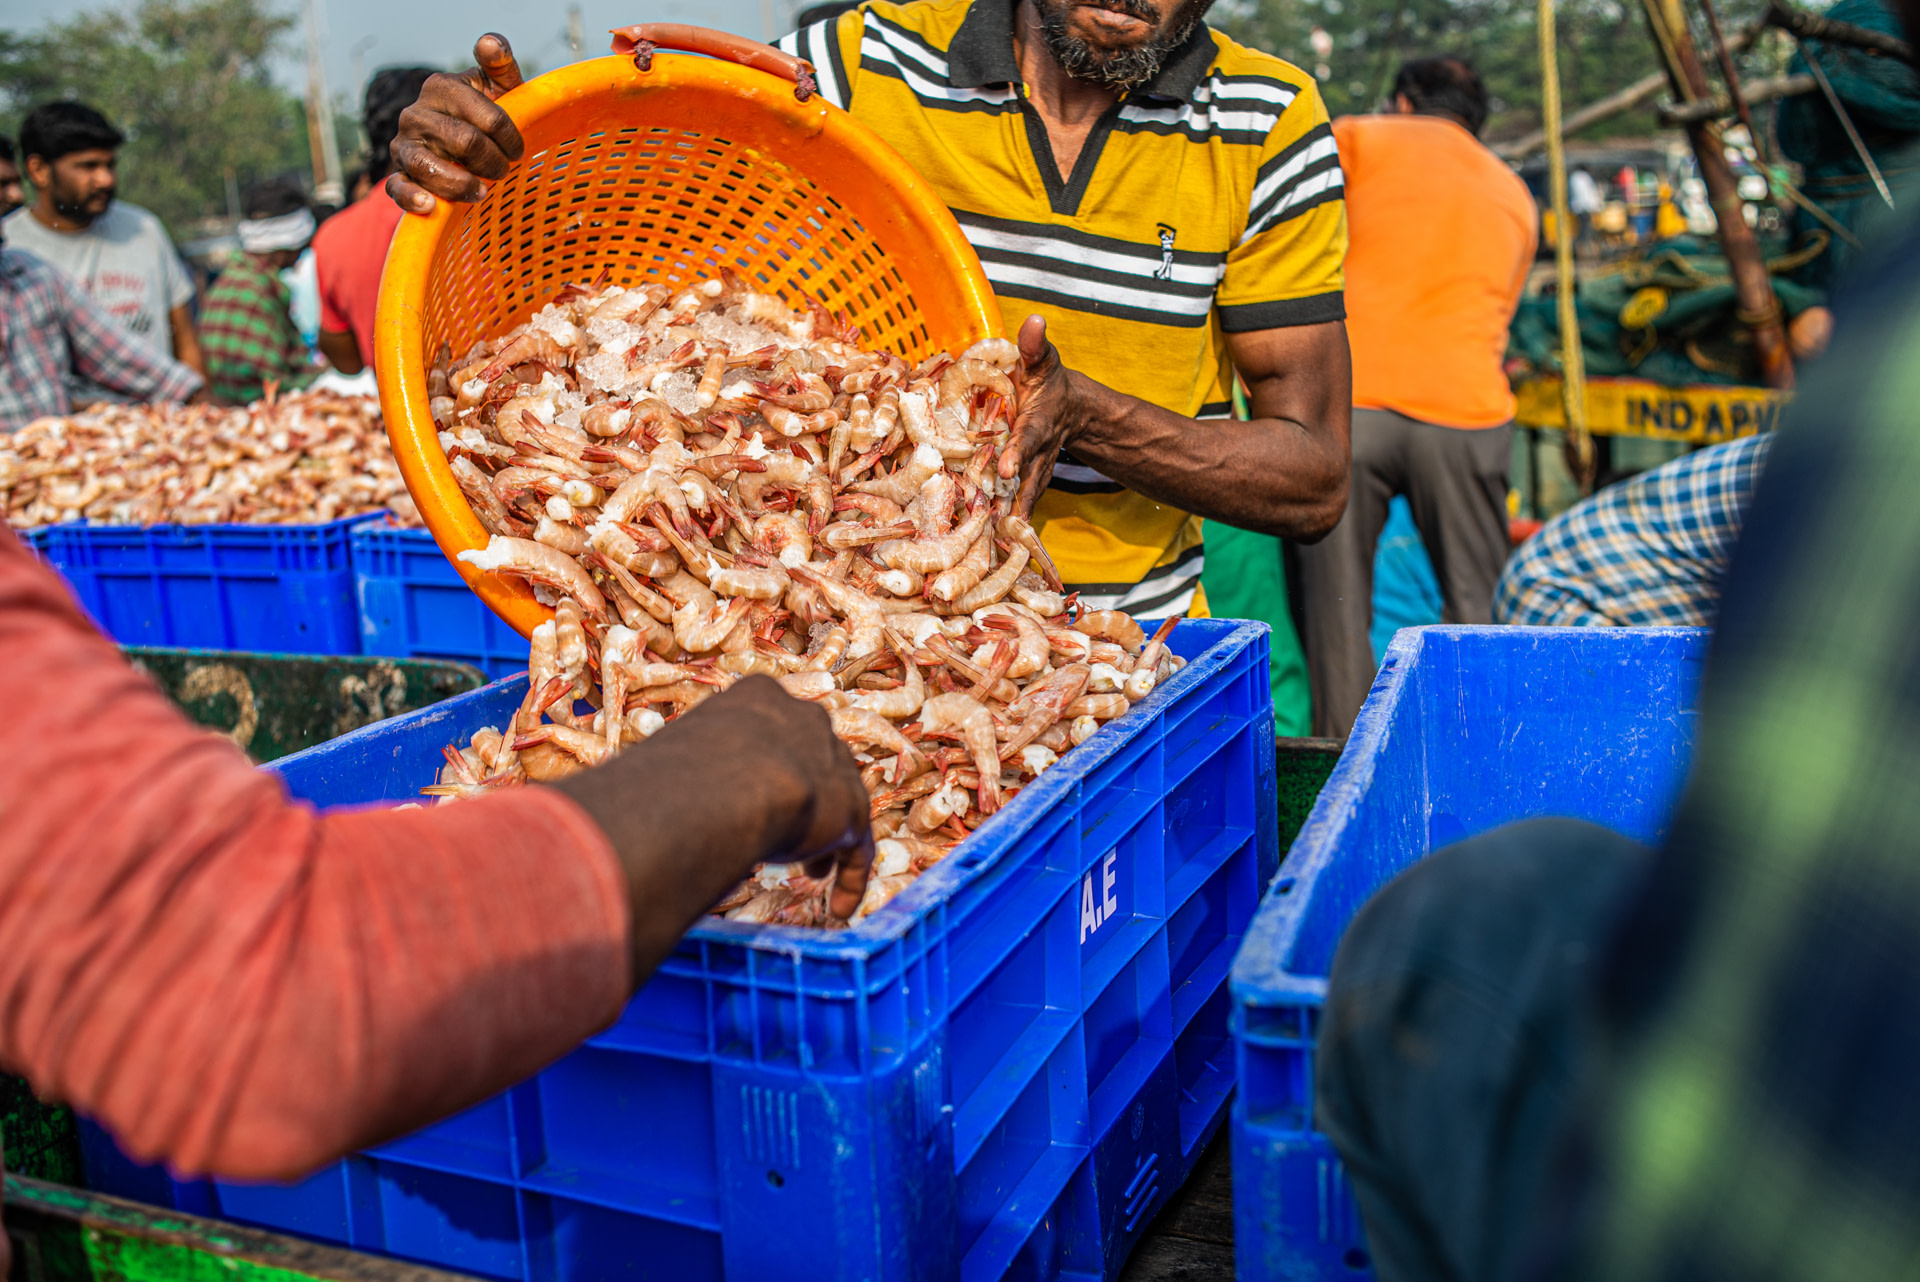 Workers separate prawns and shrimps, ocean-caught by fishing trawlers, into crates at a fishing harbour. The prawns will be transported to local markets. Vizag Harbour, Vizag, Andhra Pradesh, India, 2022. S. Chakrabarti / We Animals Media